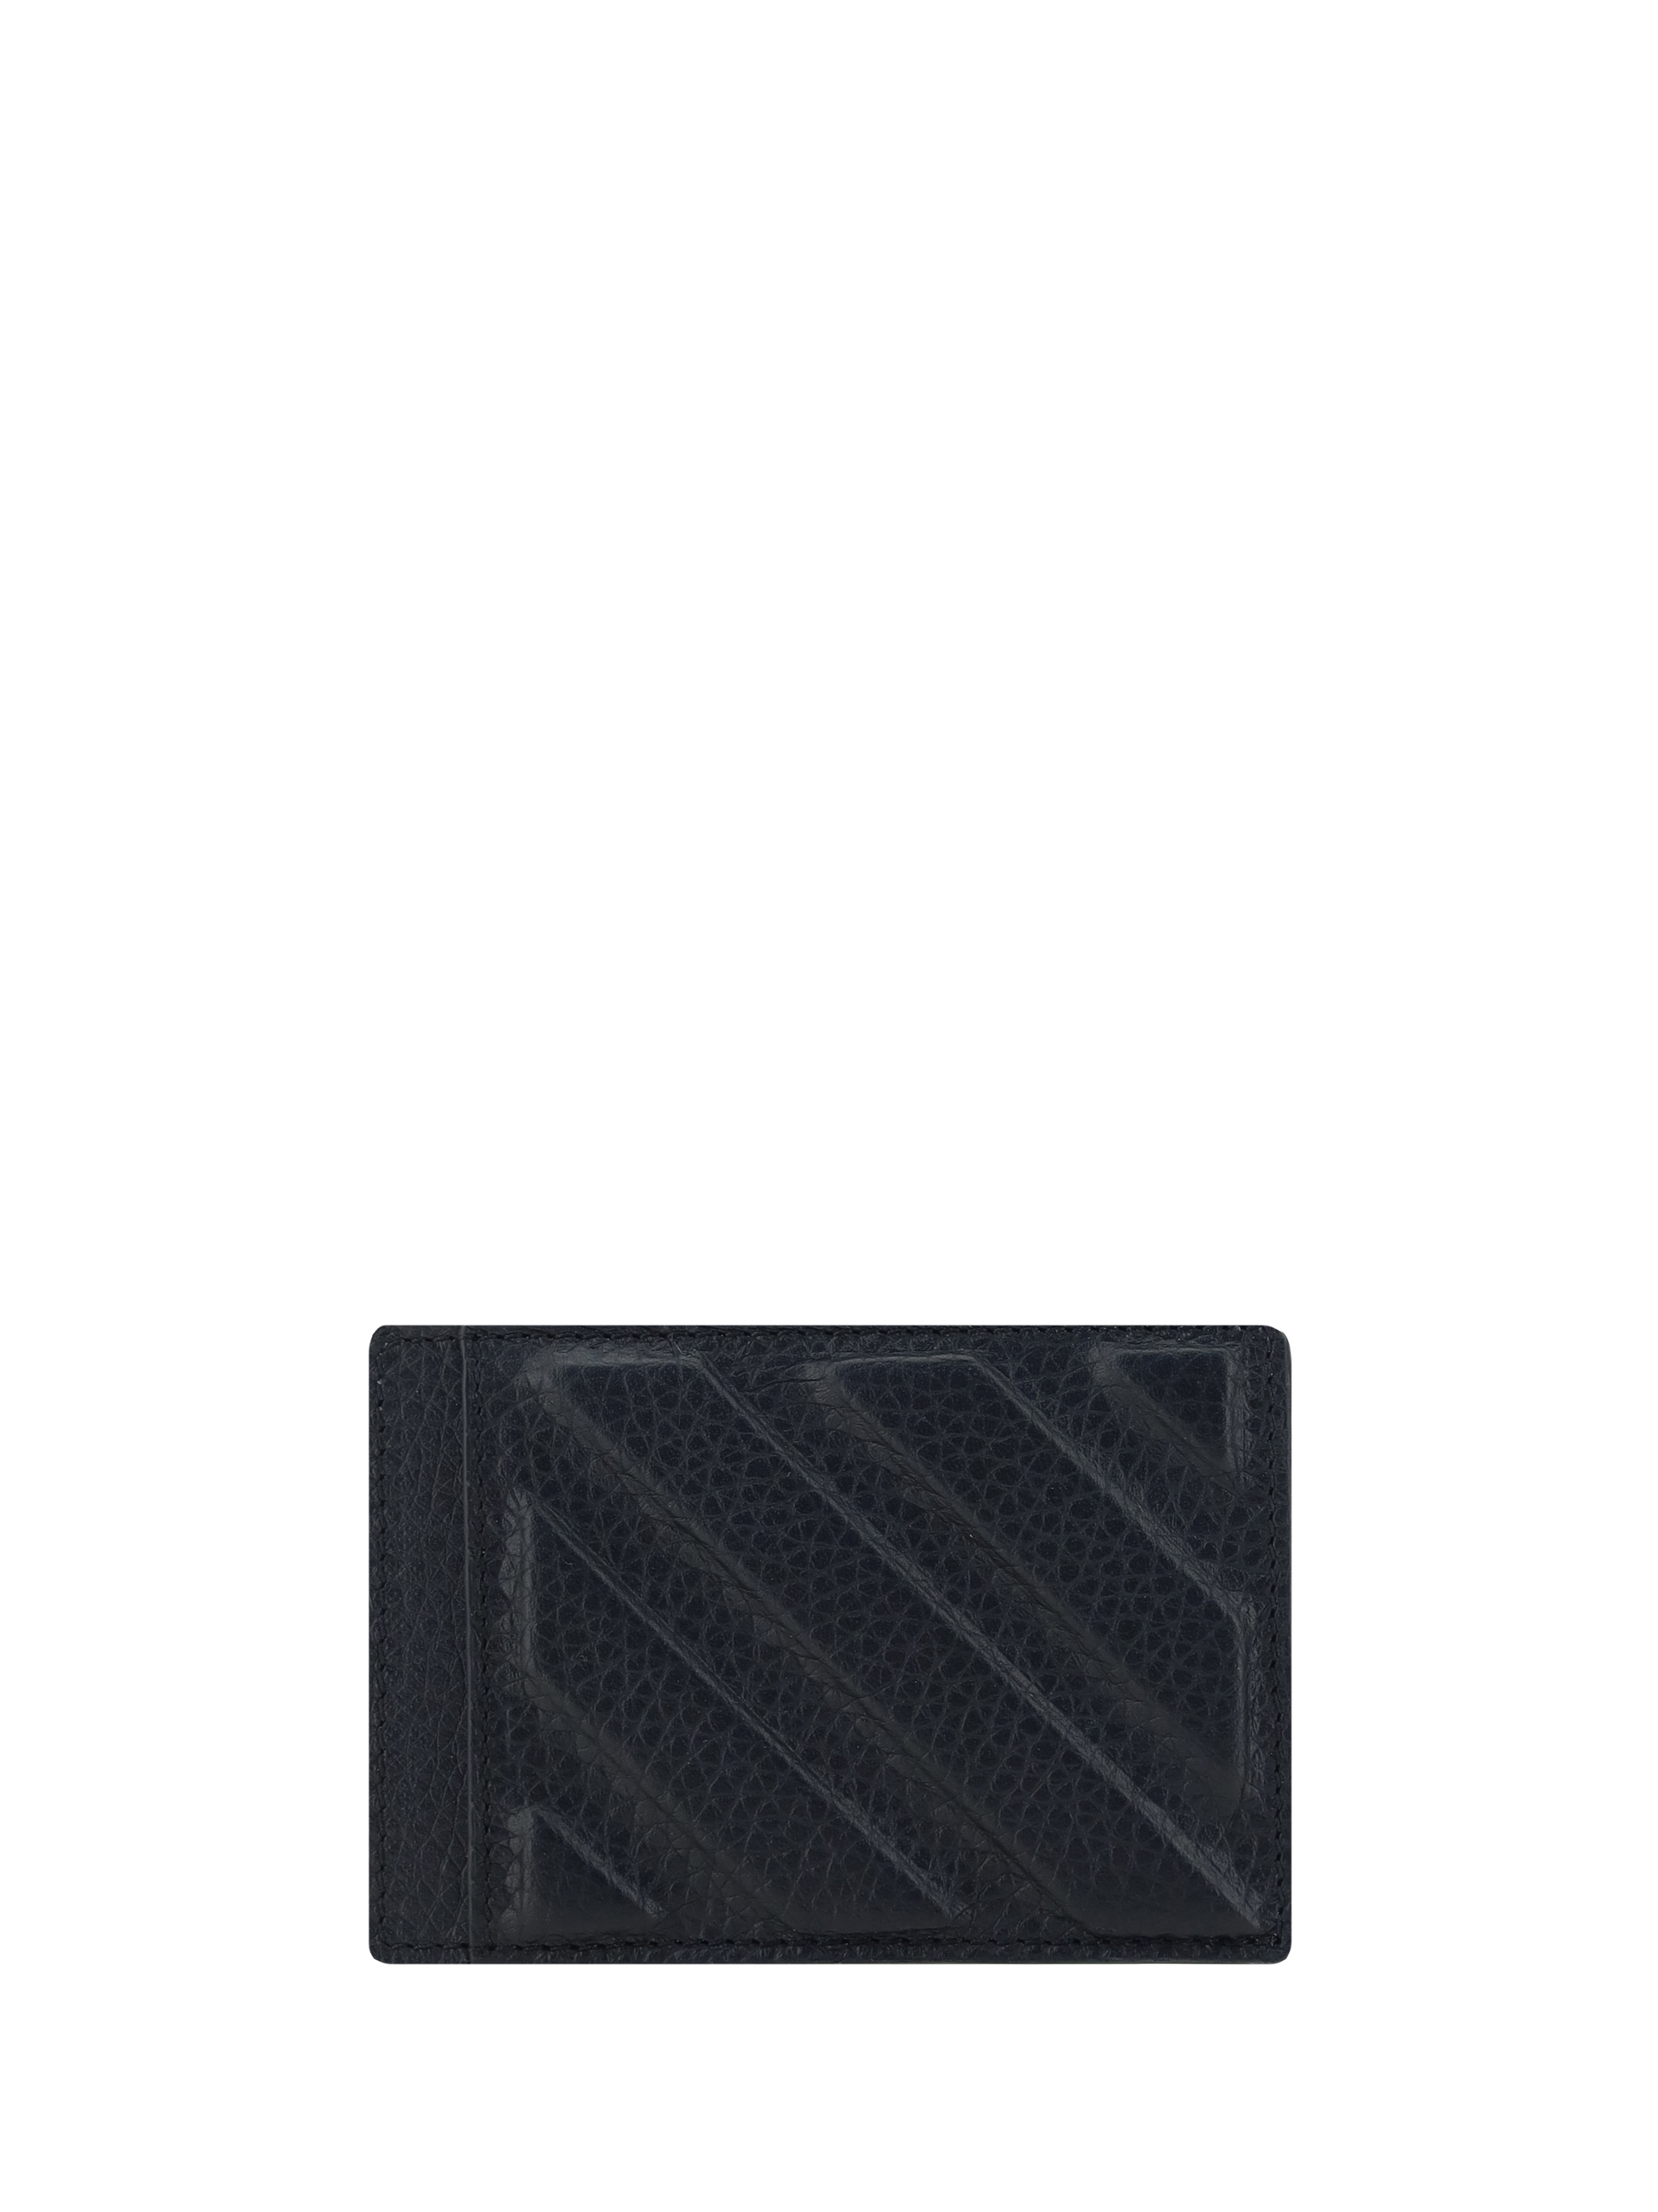 Off-White - Authenticated Wallet - Leather Black for Women, Very Good Condition